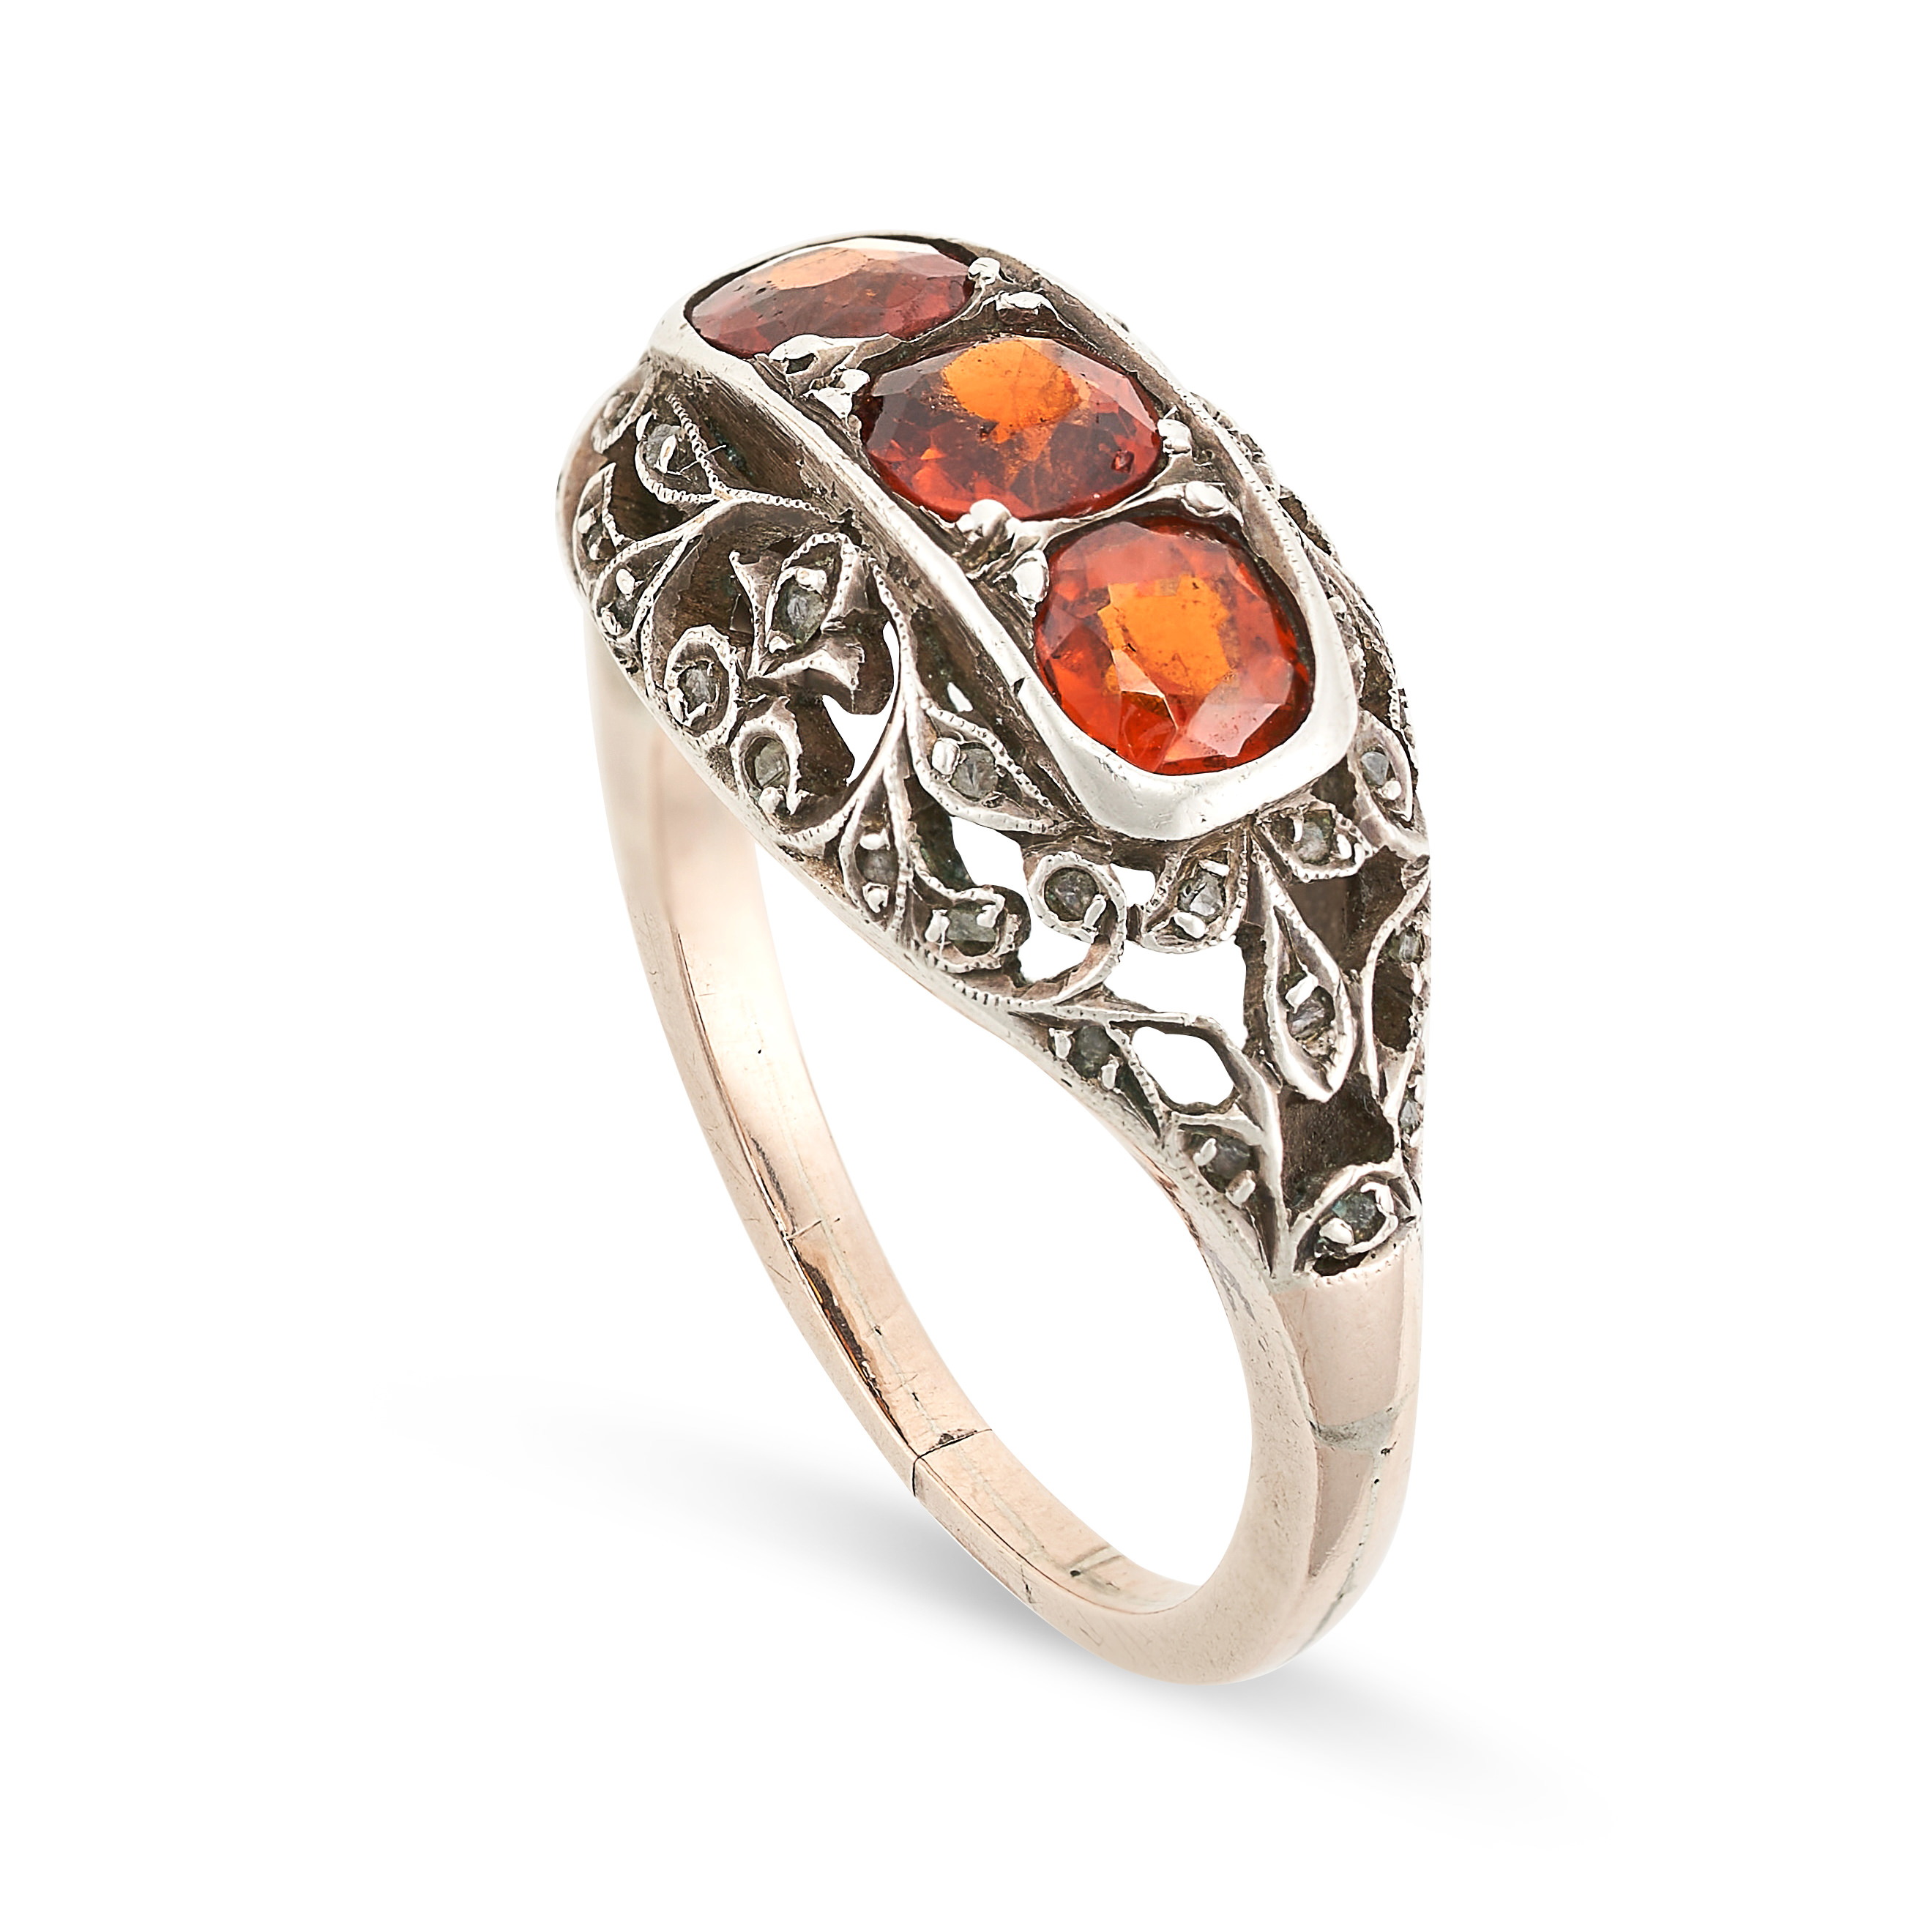 NO RESERVE - AN ORANGE PASTE AND DIAMOND RING set with three round cut orange paste gemstones in a - Image 2 of 2